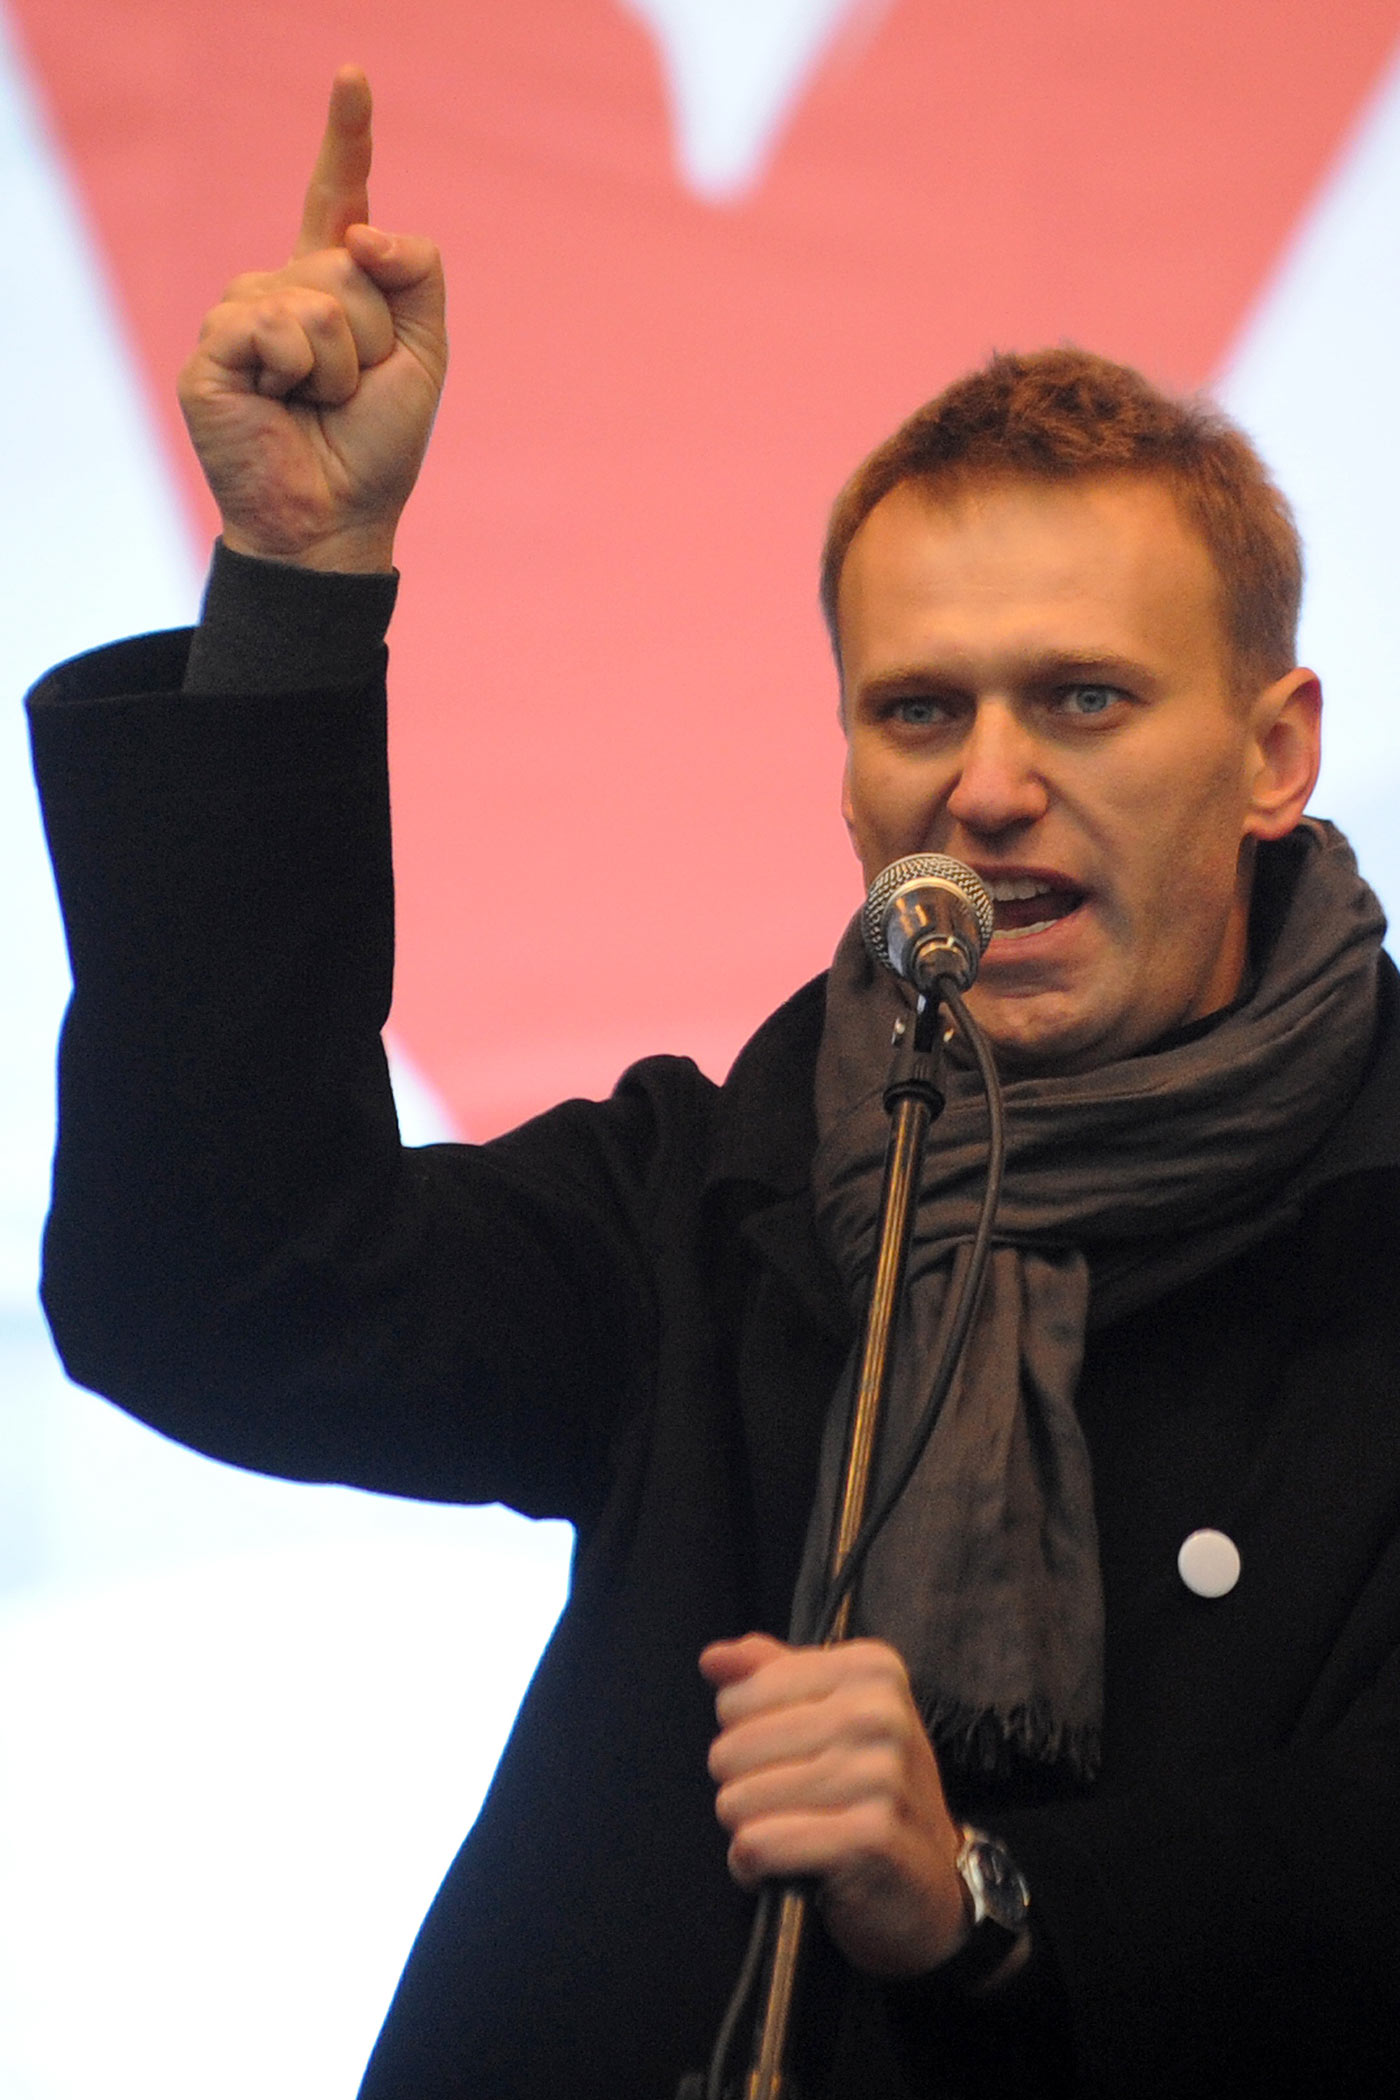 Alexei Navalny speaks during a rally against the December 4 parliament elections in Moscow - 24 December 2011